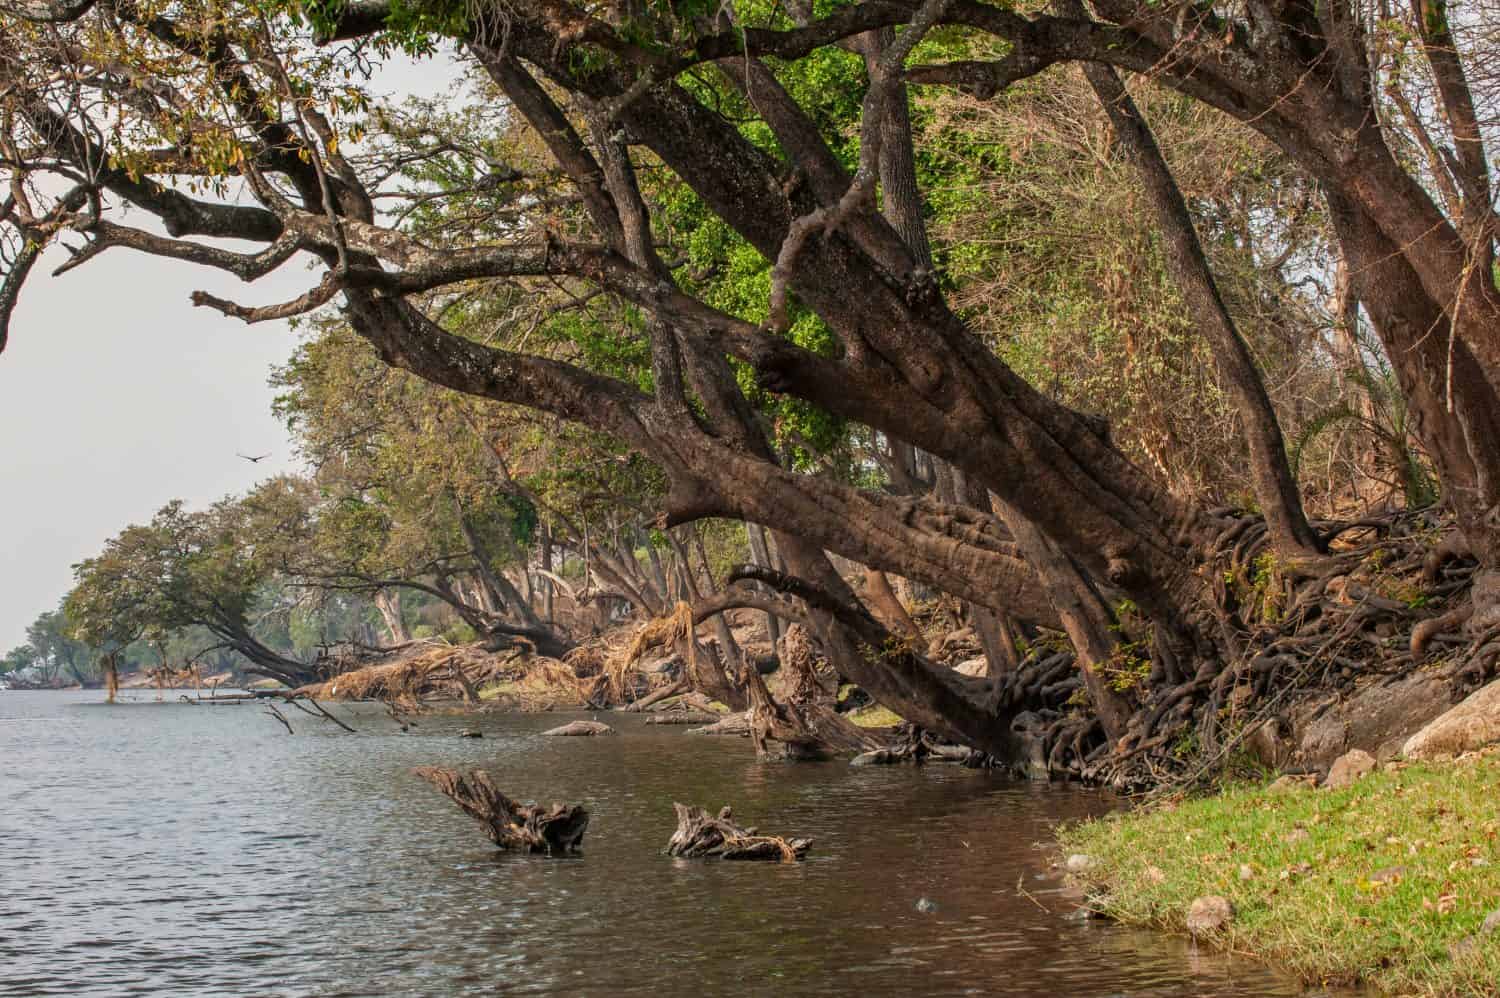 Giant Jackal-berry trees with its roots exposed, on the river banks of the Chobe river, Botswana. Diospyros mespiliformis